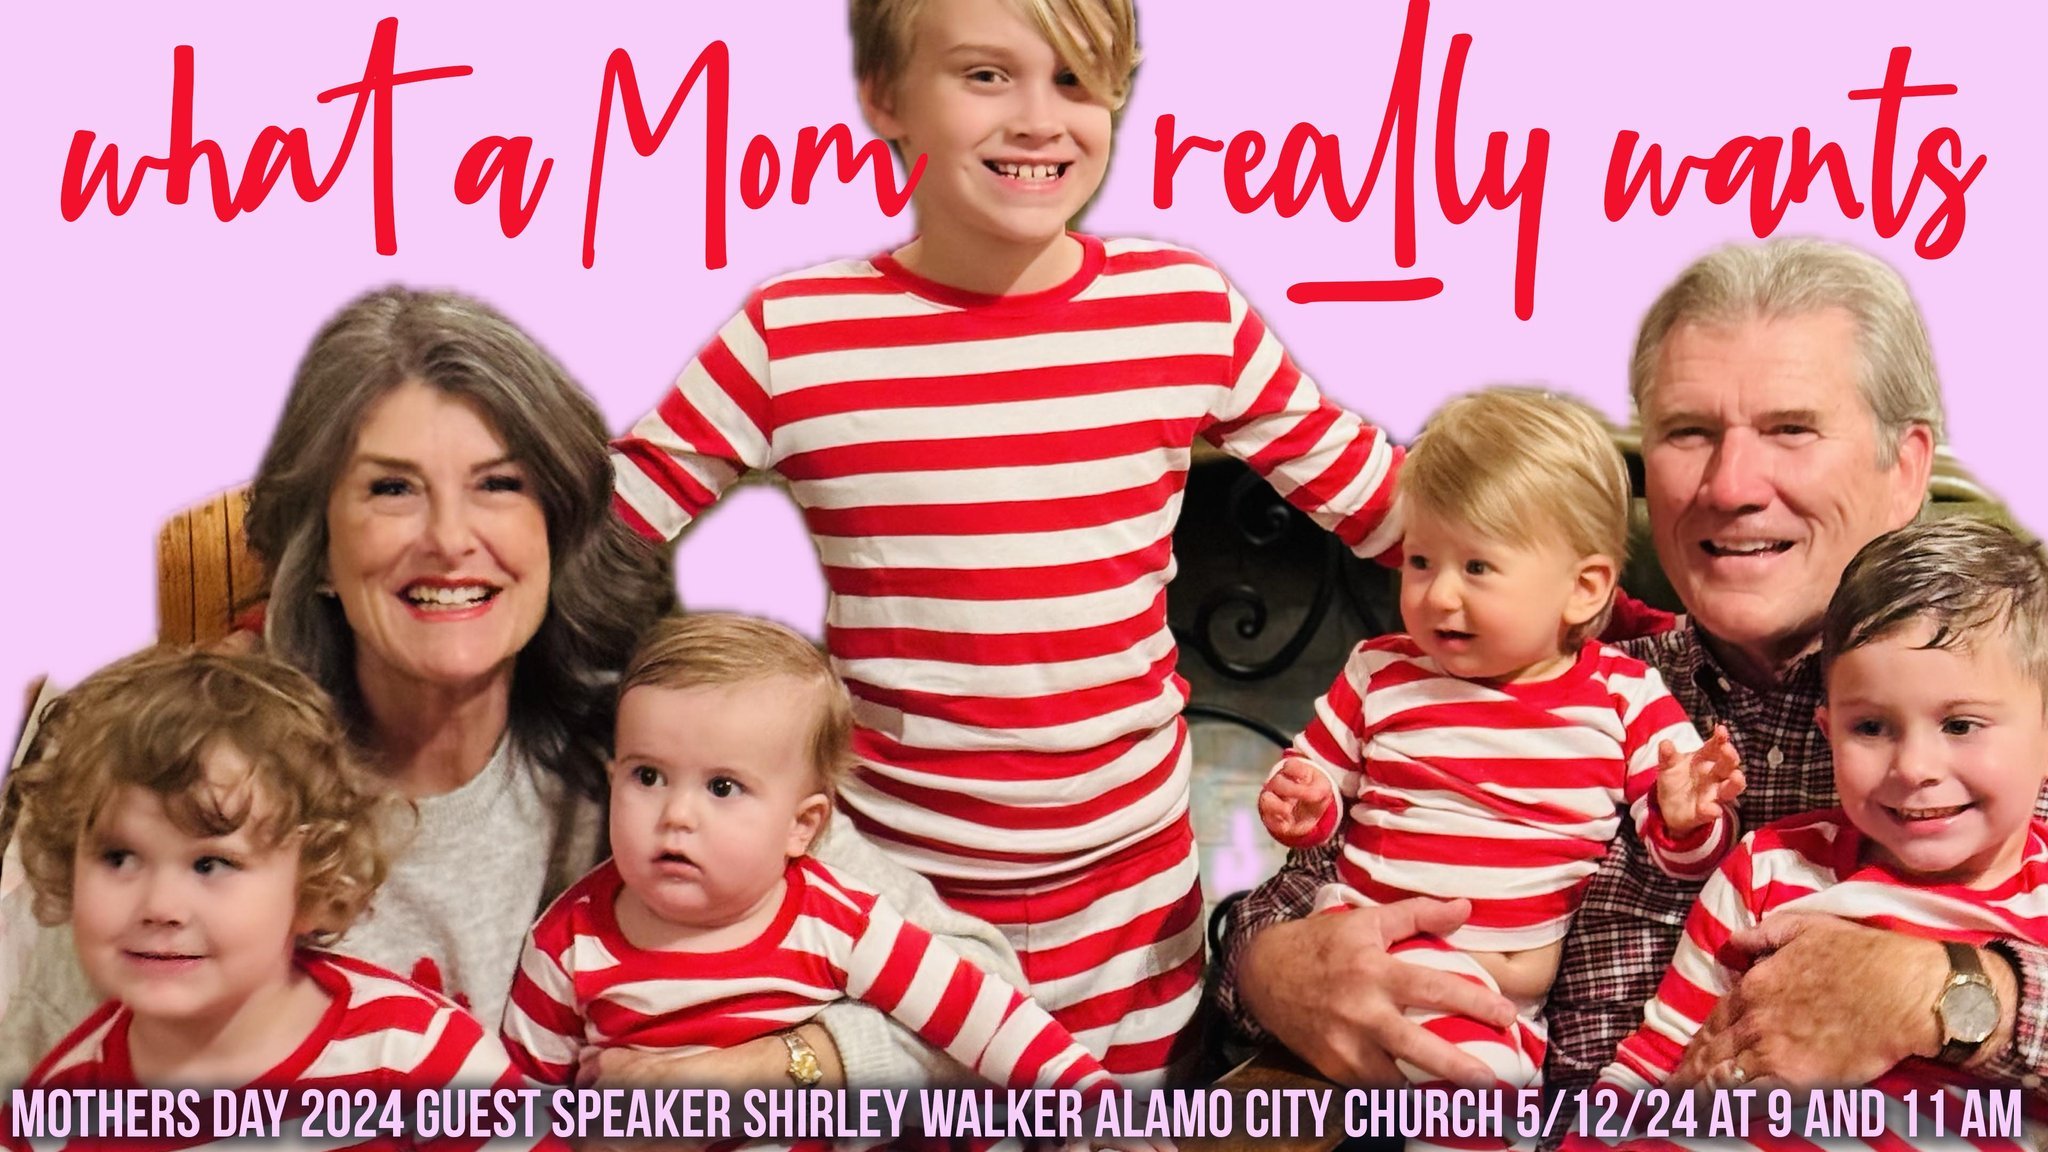 Join us TOMORROW at Alamo City!

Guest Speaker Shirley Walker will be sharing a special message for all the Mothers &quot;What a Mom Really Wants&quot;.
We are thrilled to have Jennifer Massey Stephens back with us to lead us into GOD'S presence tomo